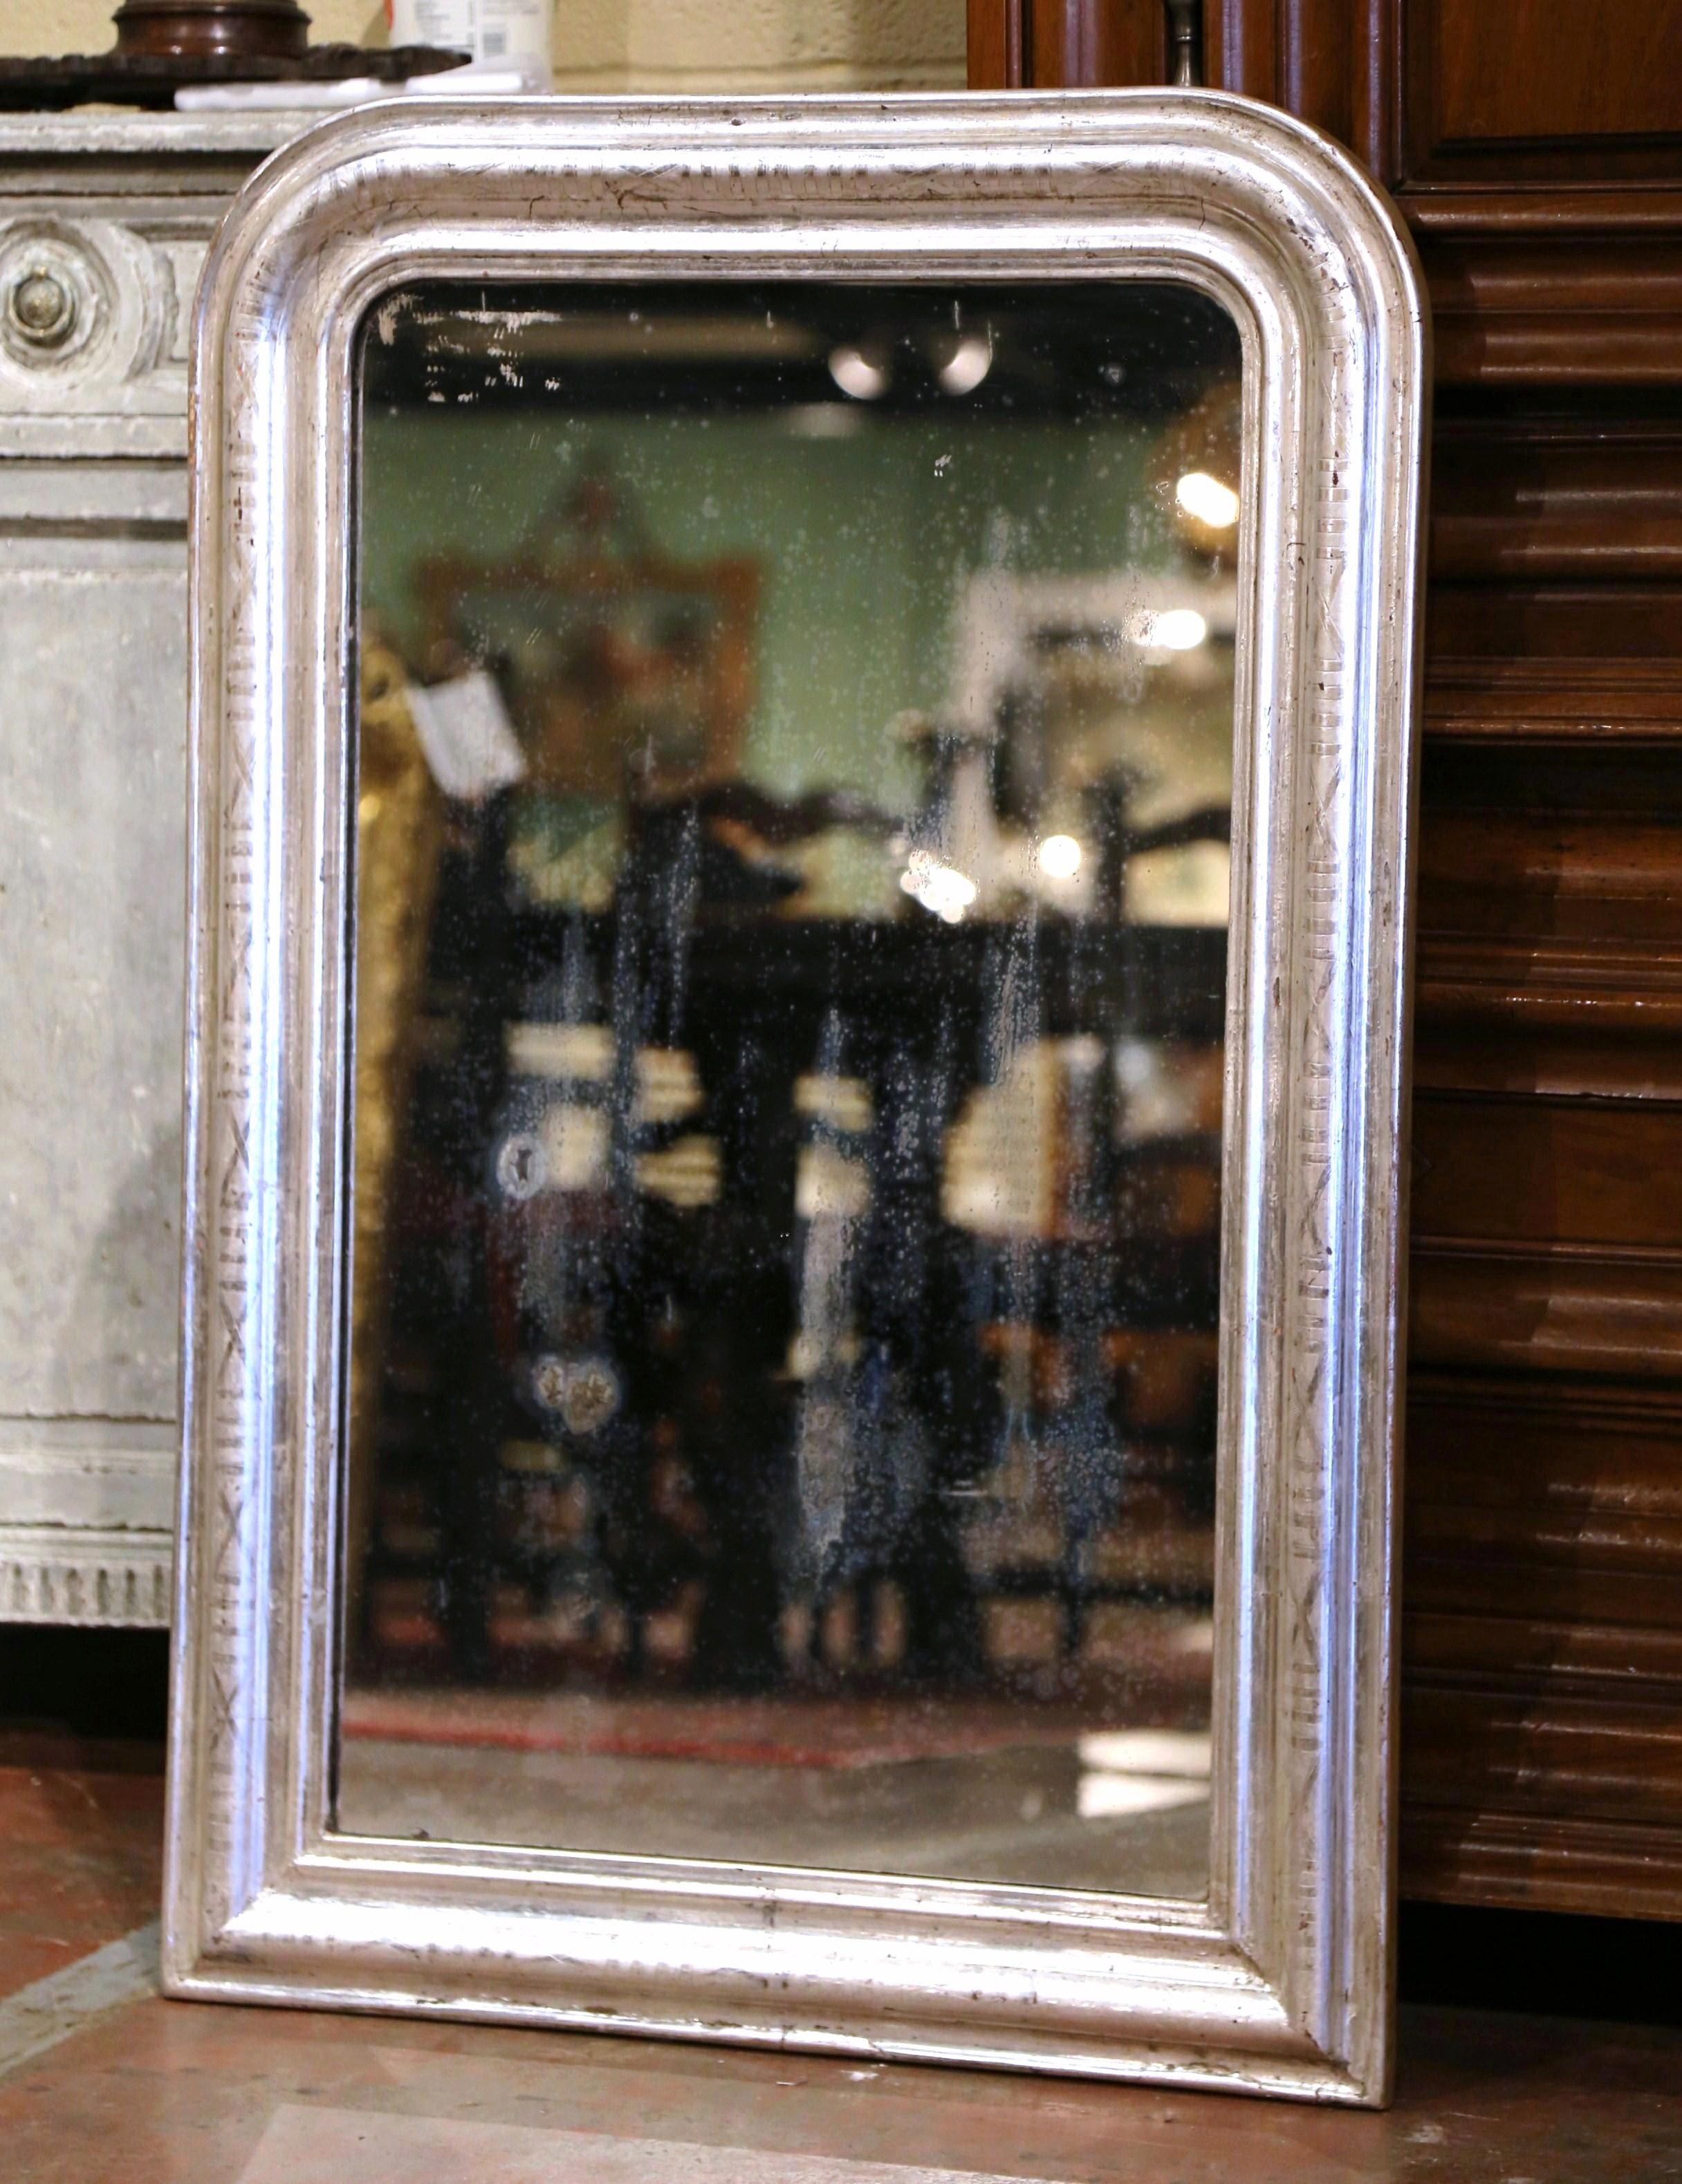 Crafted in the Burgundy region of France, circa 1870, the rectangular antique mirror has traditional, timeless lines with rounded corners. The frame is decorated with a luxurious silver leaf finish over discrete engraved geometric motifs. The